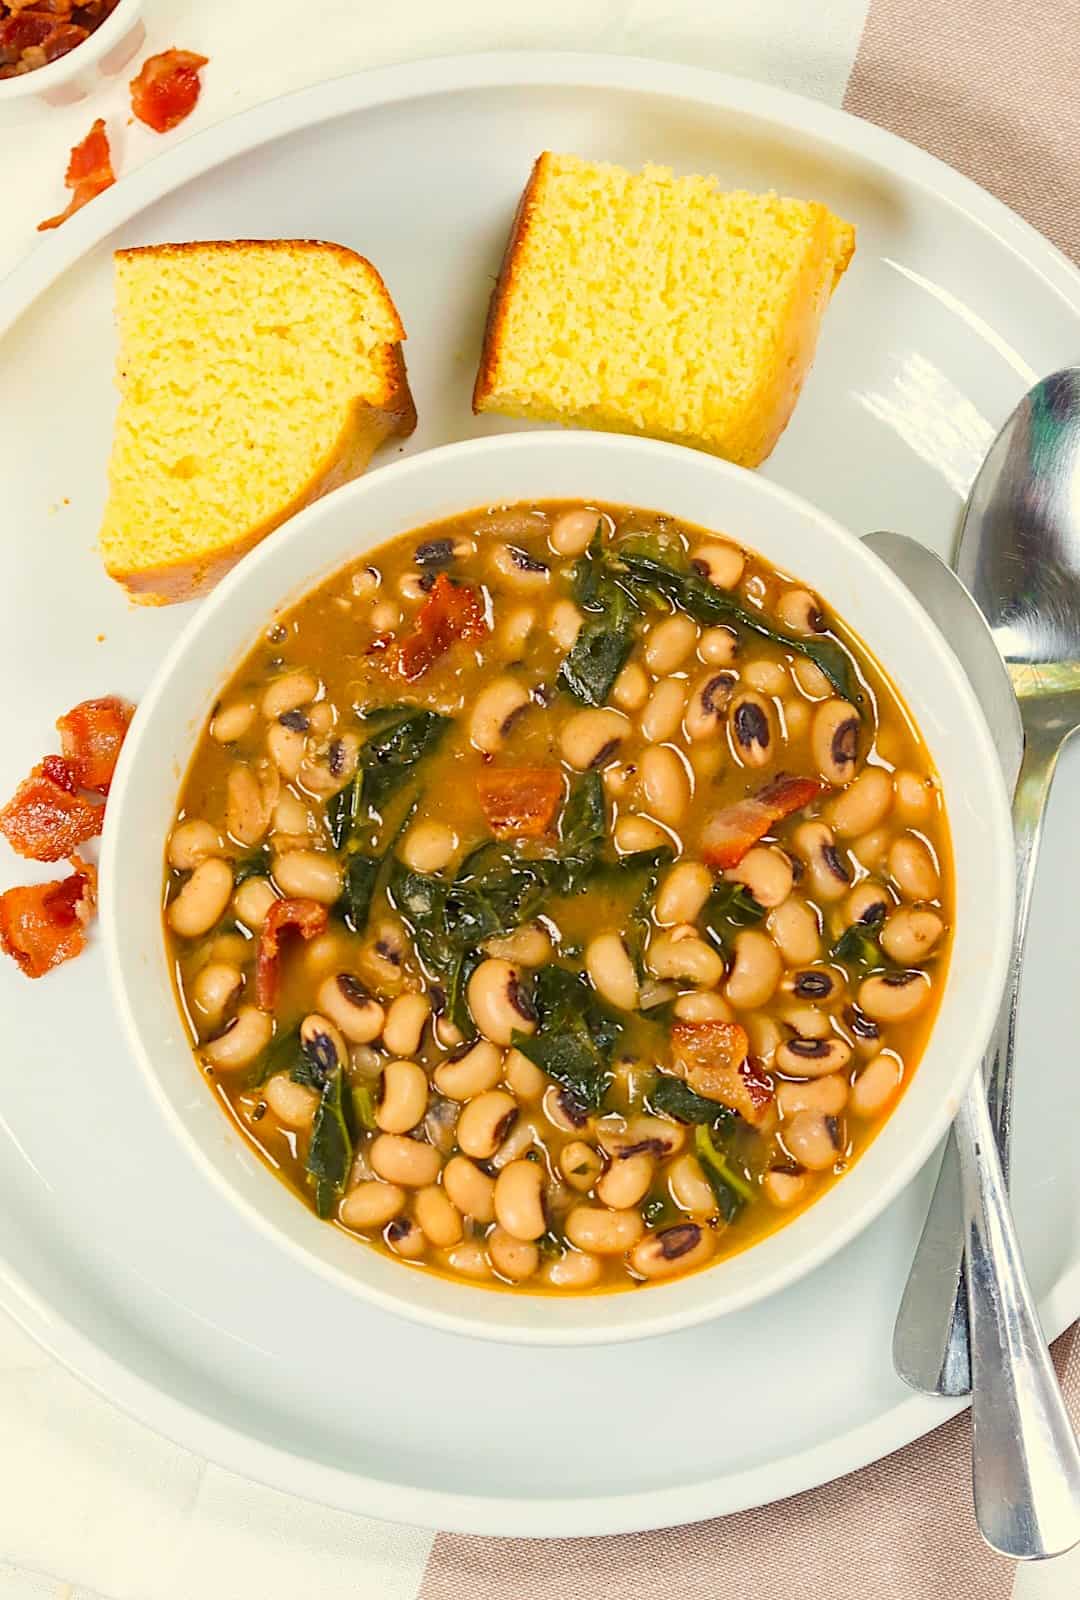 A steaming hot bowl of Black-Eyed Peas and Collard Greens and cornbread